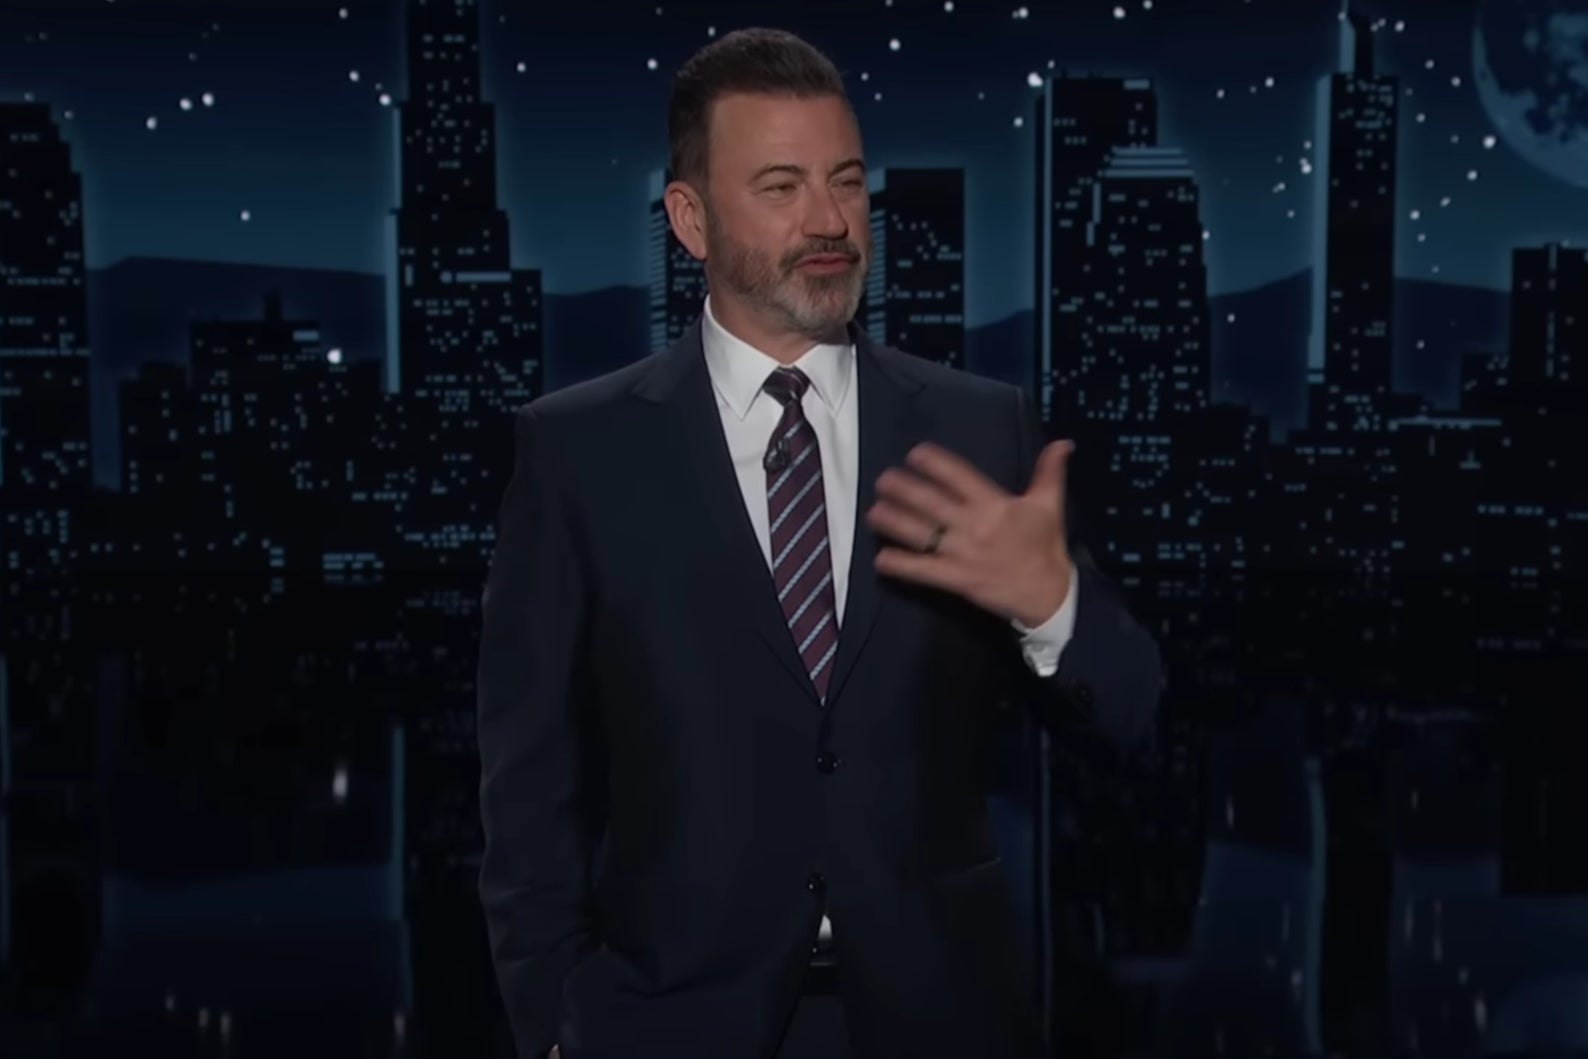 Jimmy Kimmel roasts Donald Trump during his opening monologue on 9 May